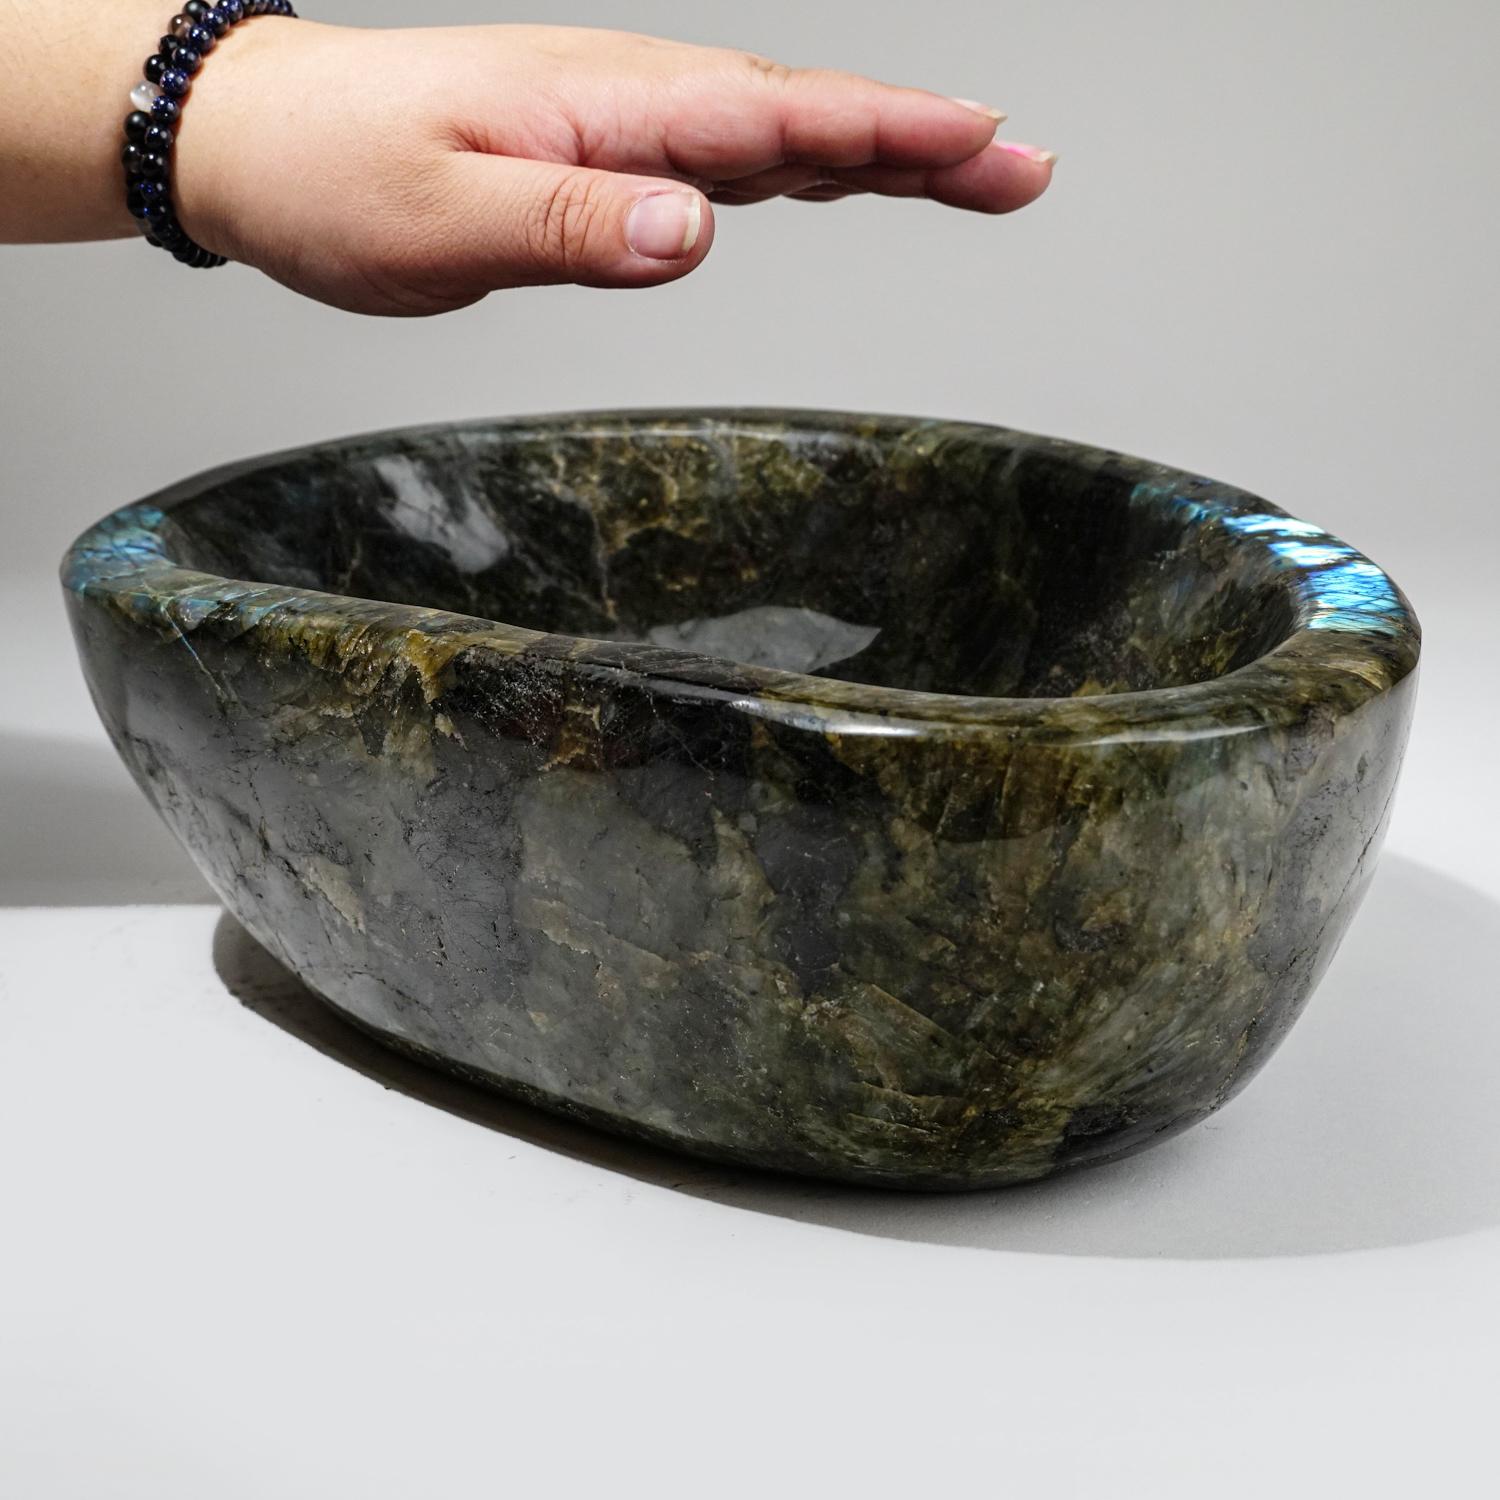 Malagasy Genuine Polished Labradorite Large Bowl (19.6 lbs) For Sale